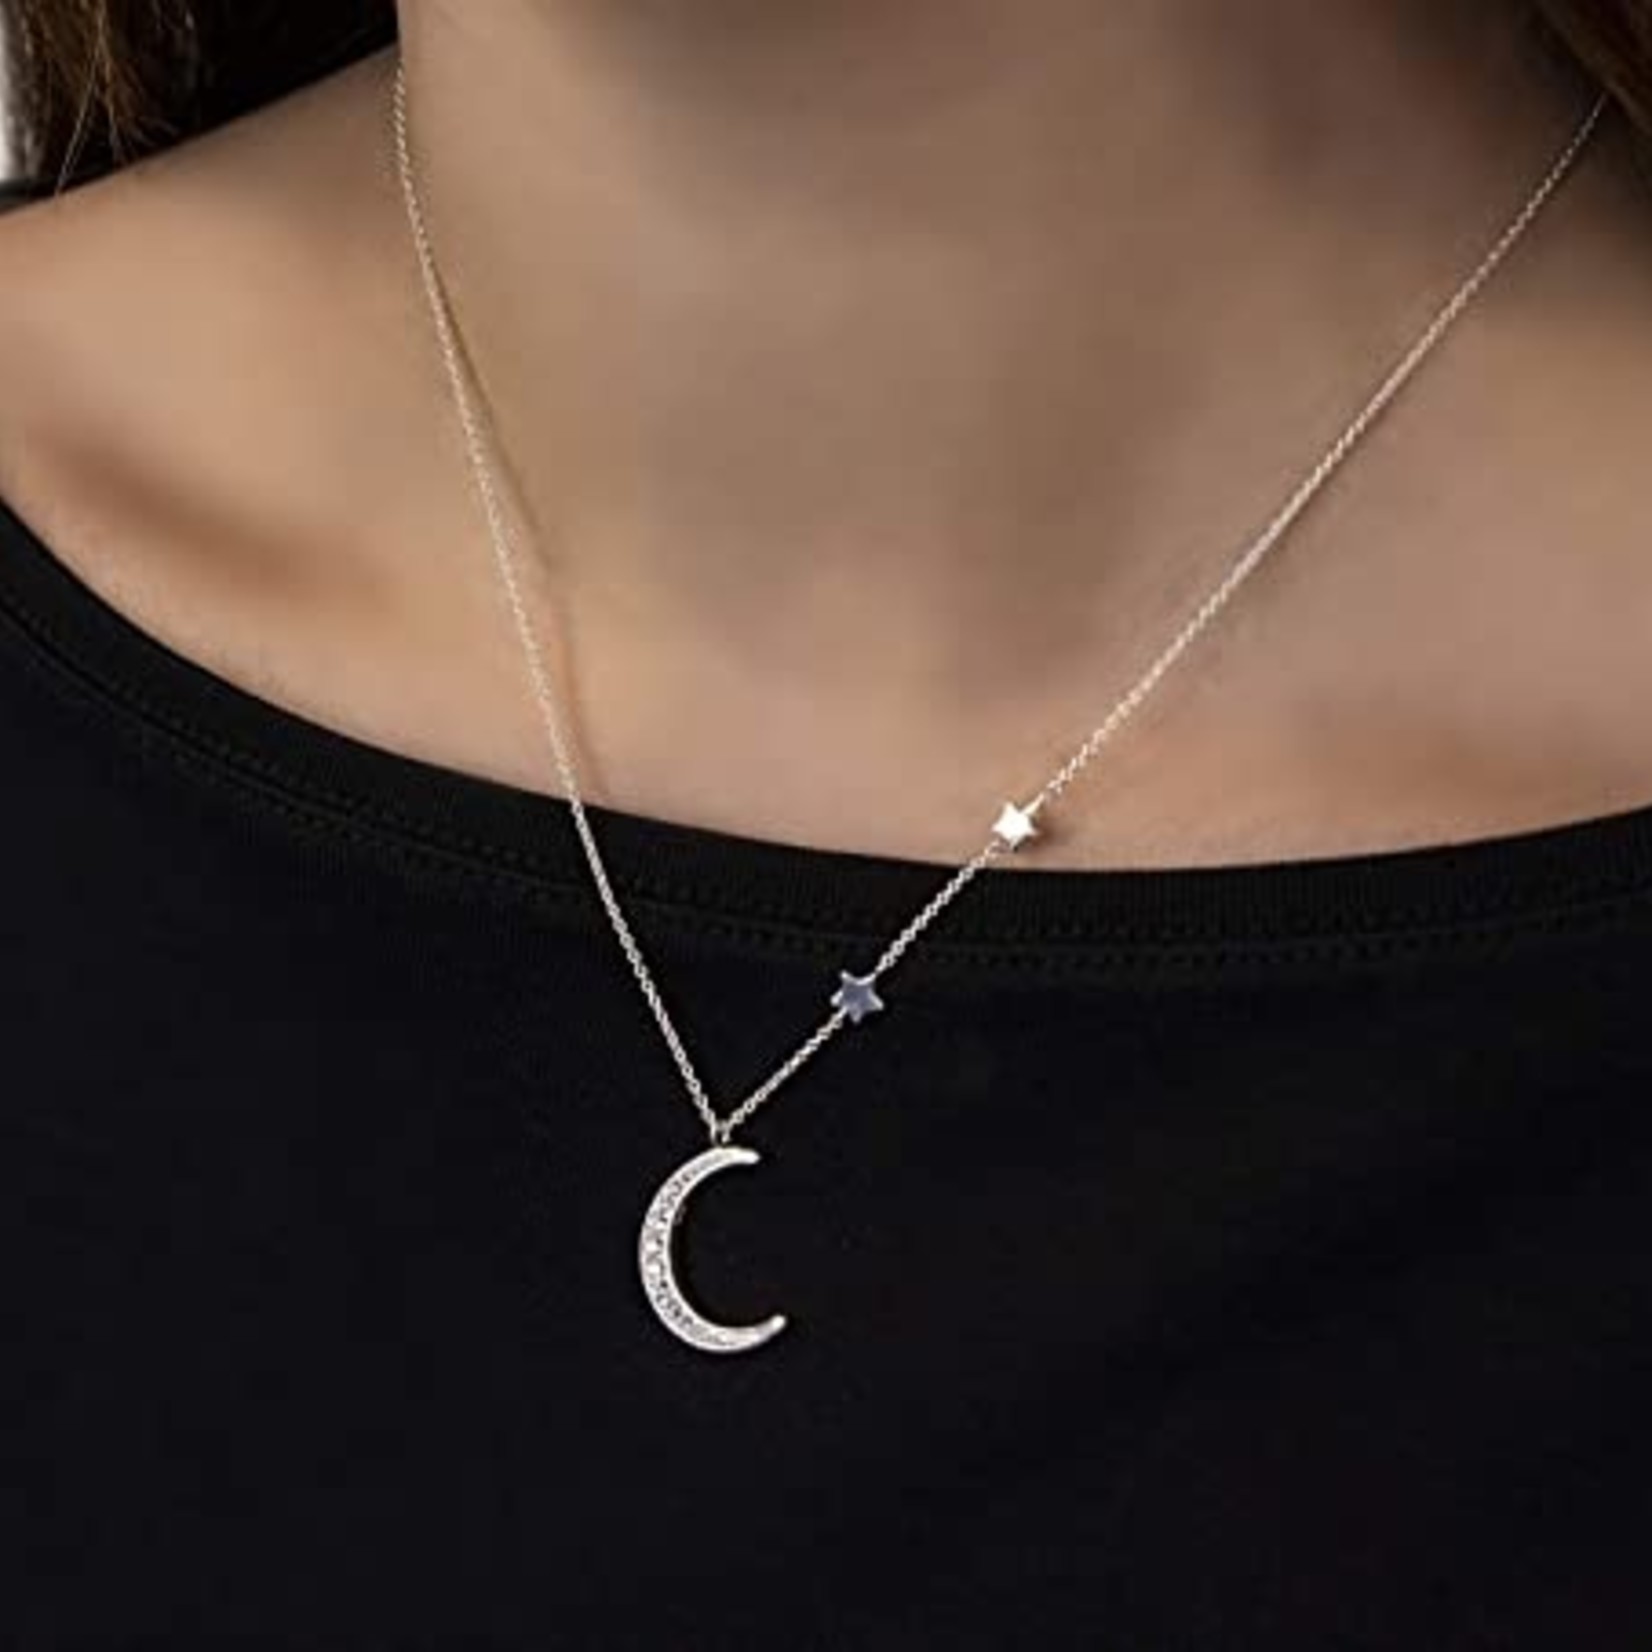 EFYTAL Jewelry Sterling Silver Moon & Stars Necklace - Grad Necklace